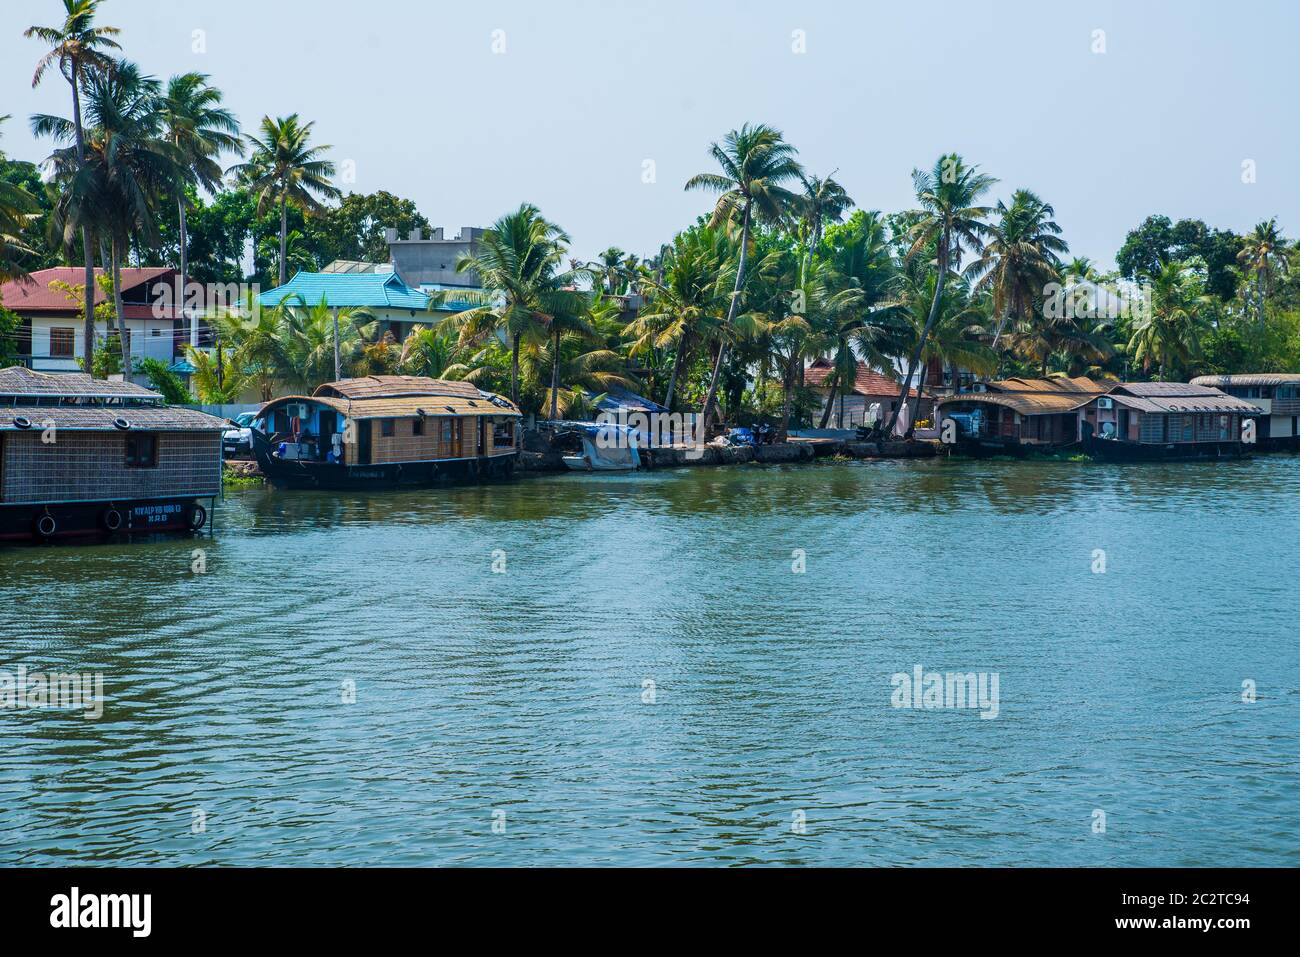 Small houses in a local village located next to Kerala's backwater on a bright sunny day and traditional Houseboat seen sailing through the river Stock Photo